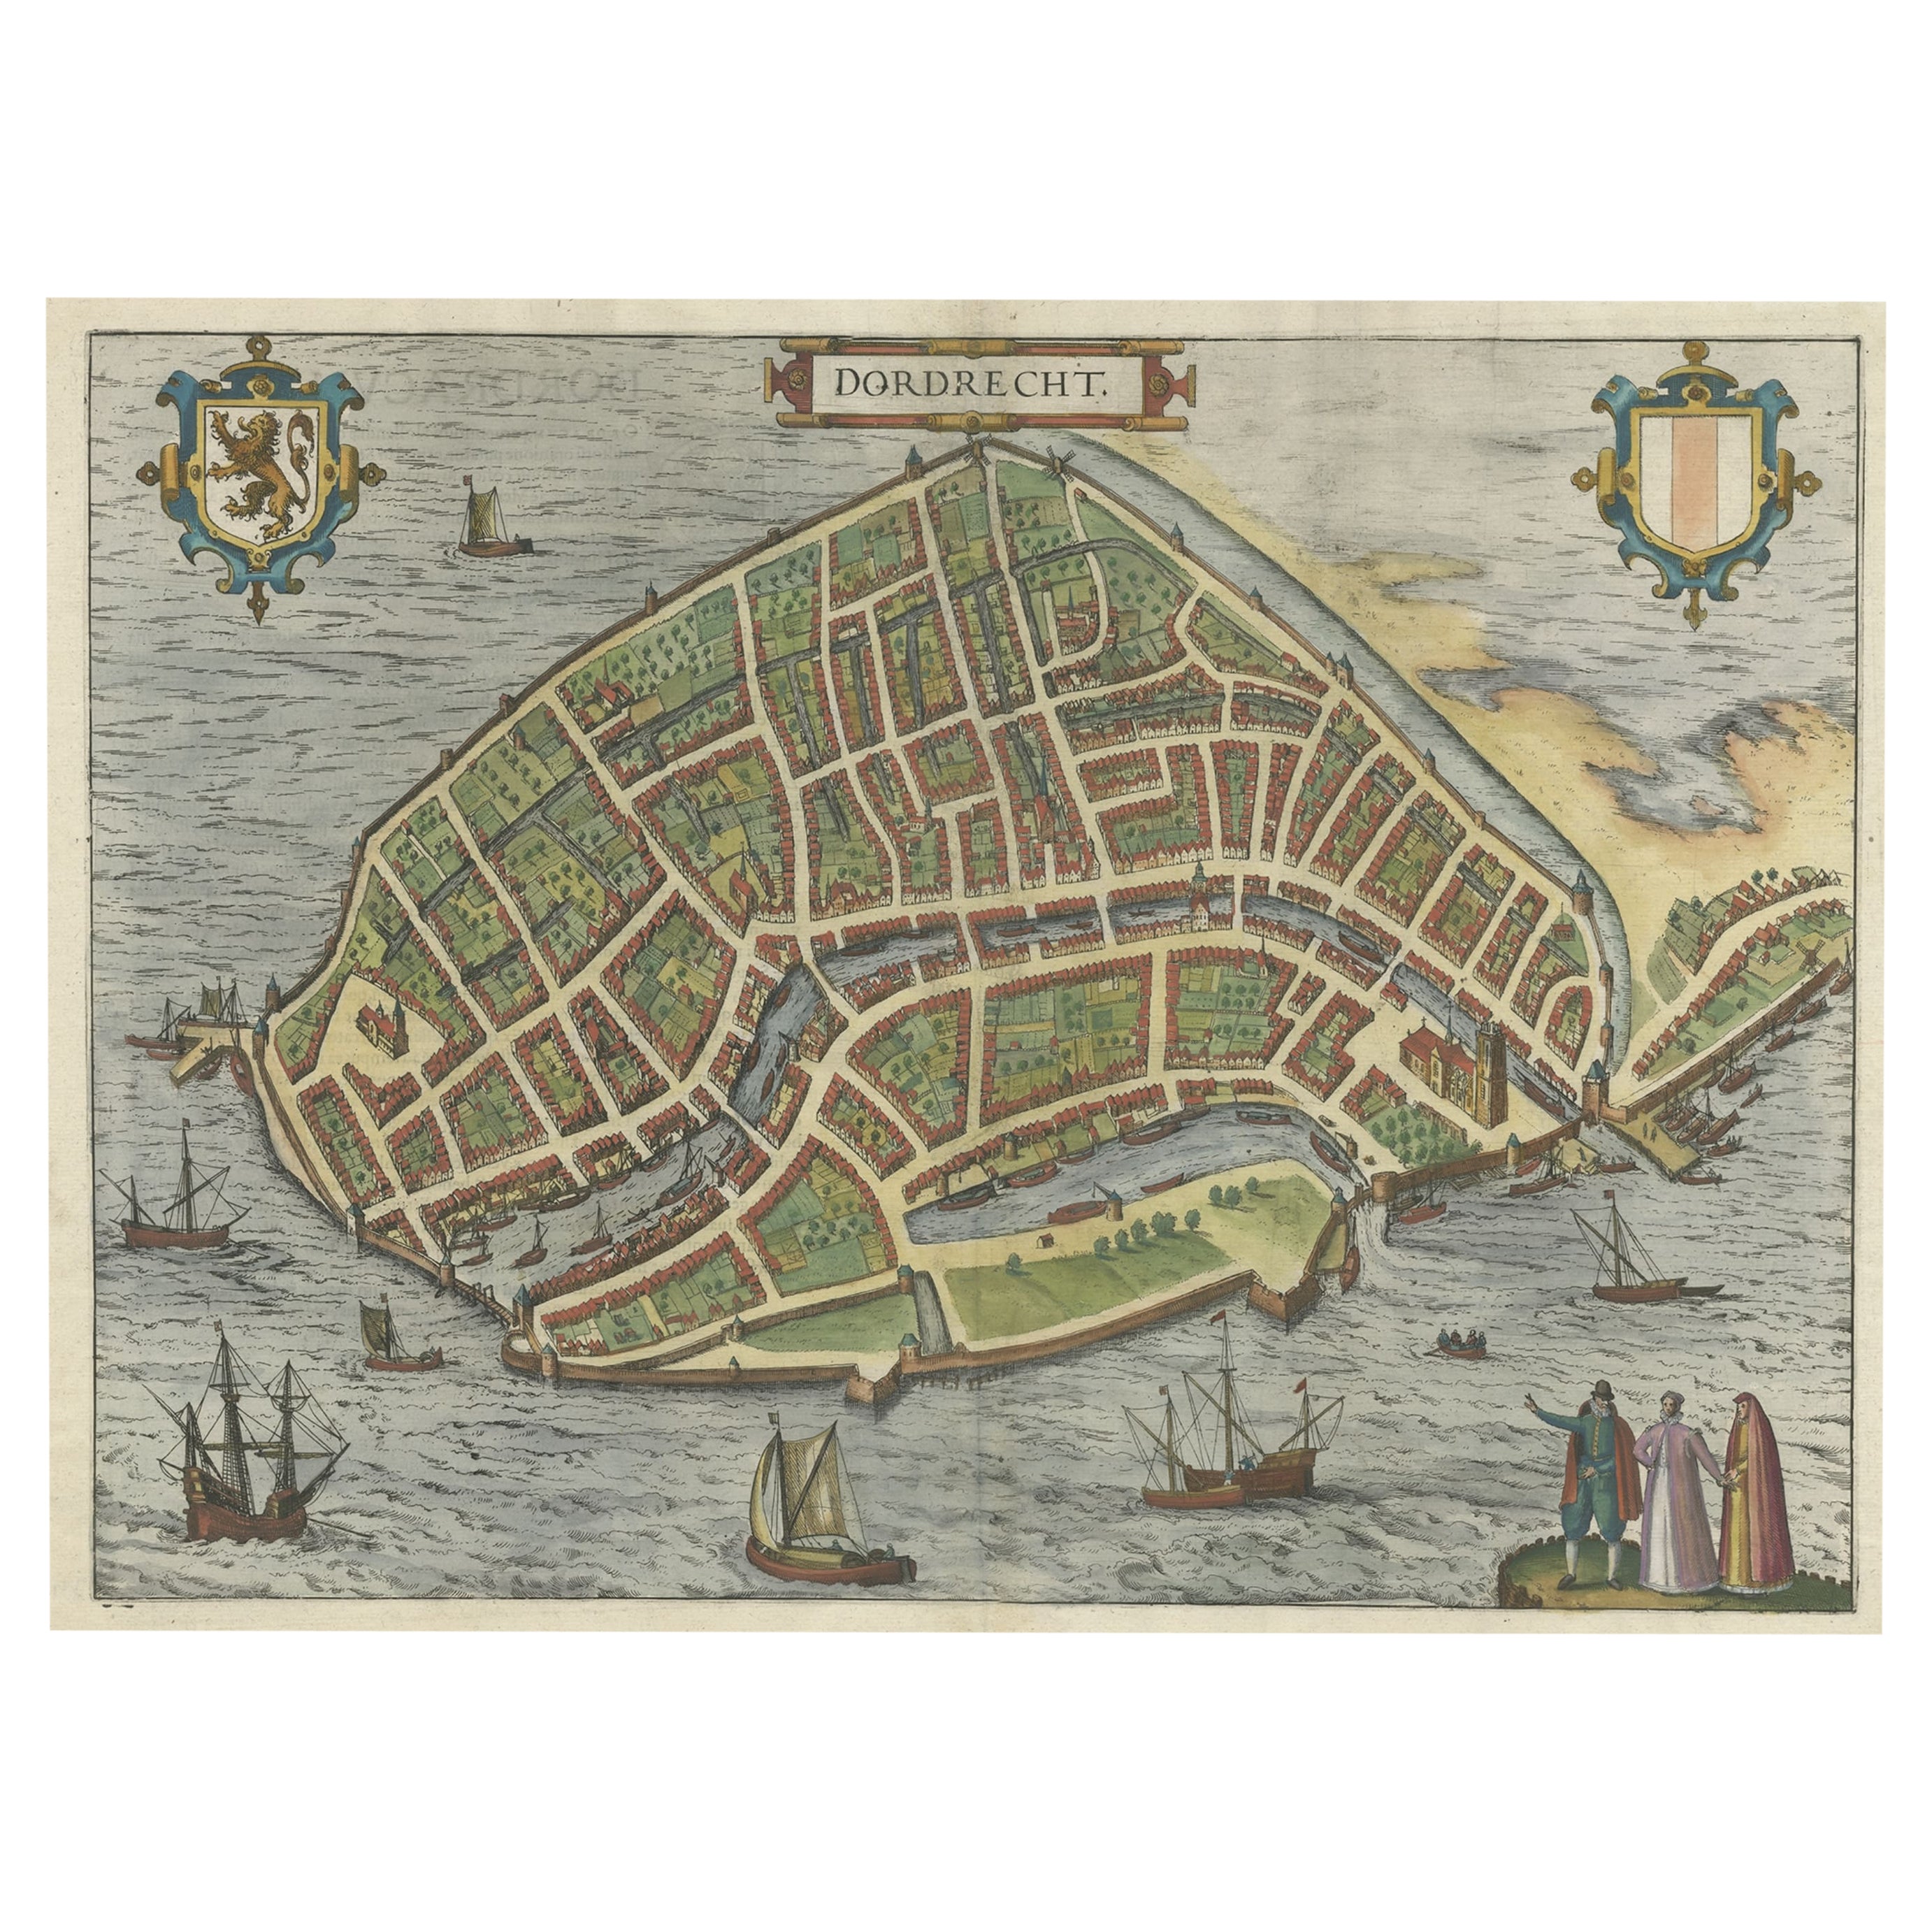 Beautiful Decorative Antique Map of the City of Dordrecht, the Netherlands, 1581